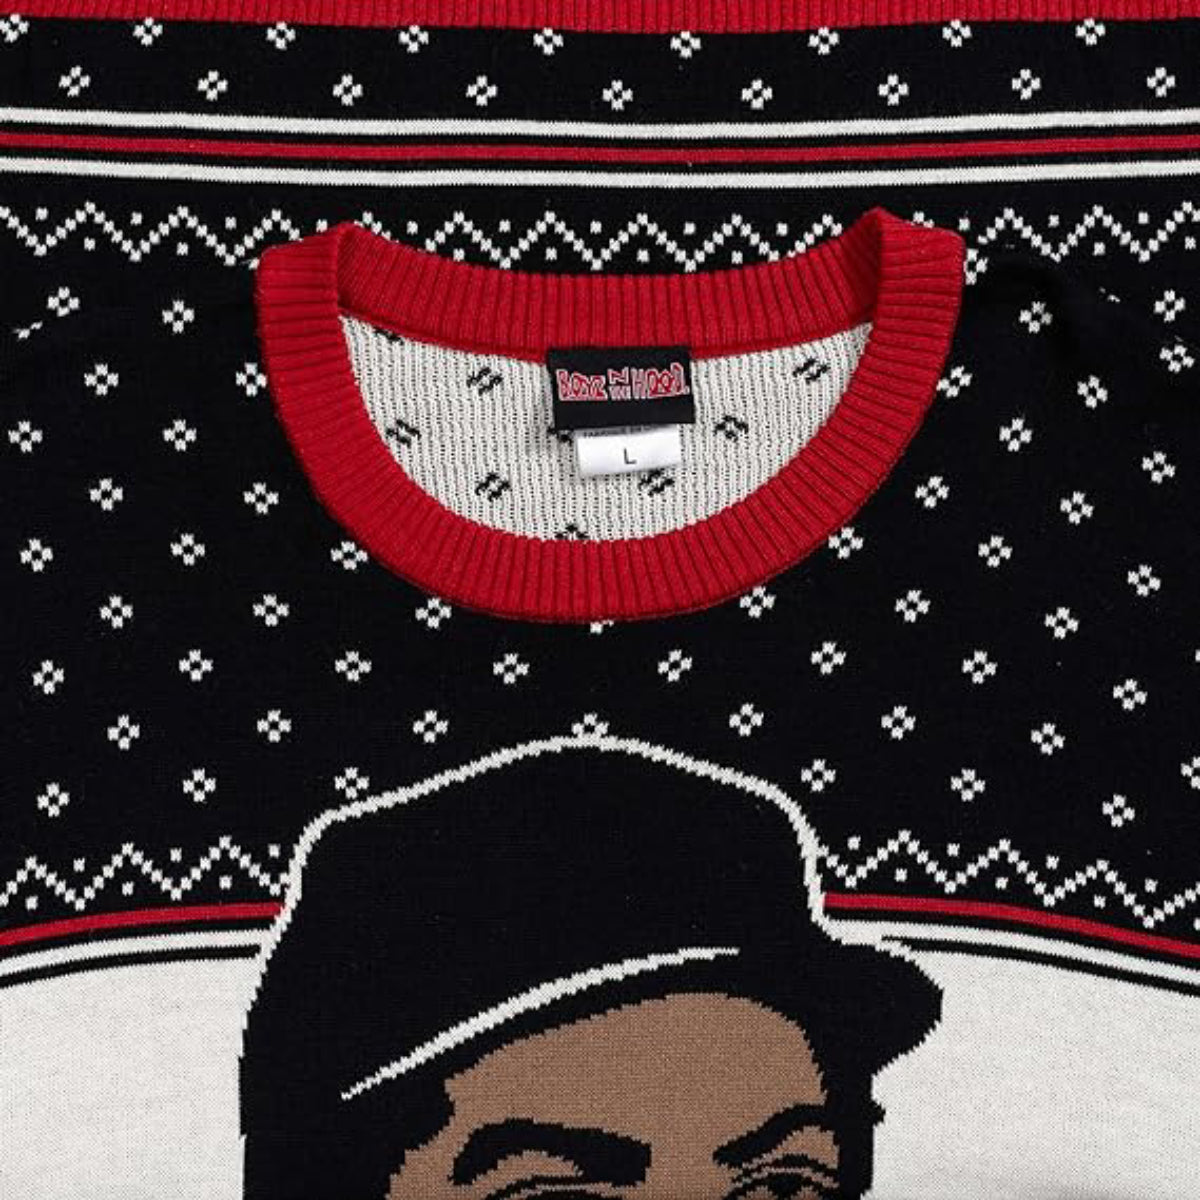 Boyz N The Hood Ugly Christmas Sweaters Doughboy's Gangster Style for the Holidays Collar